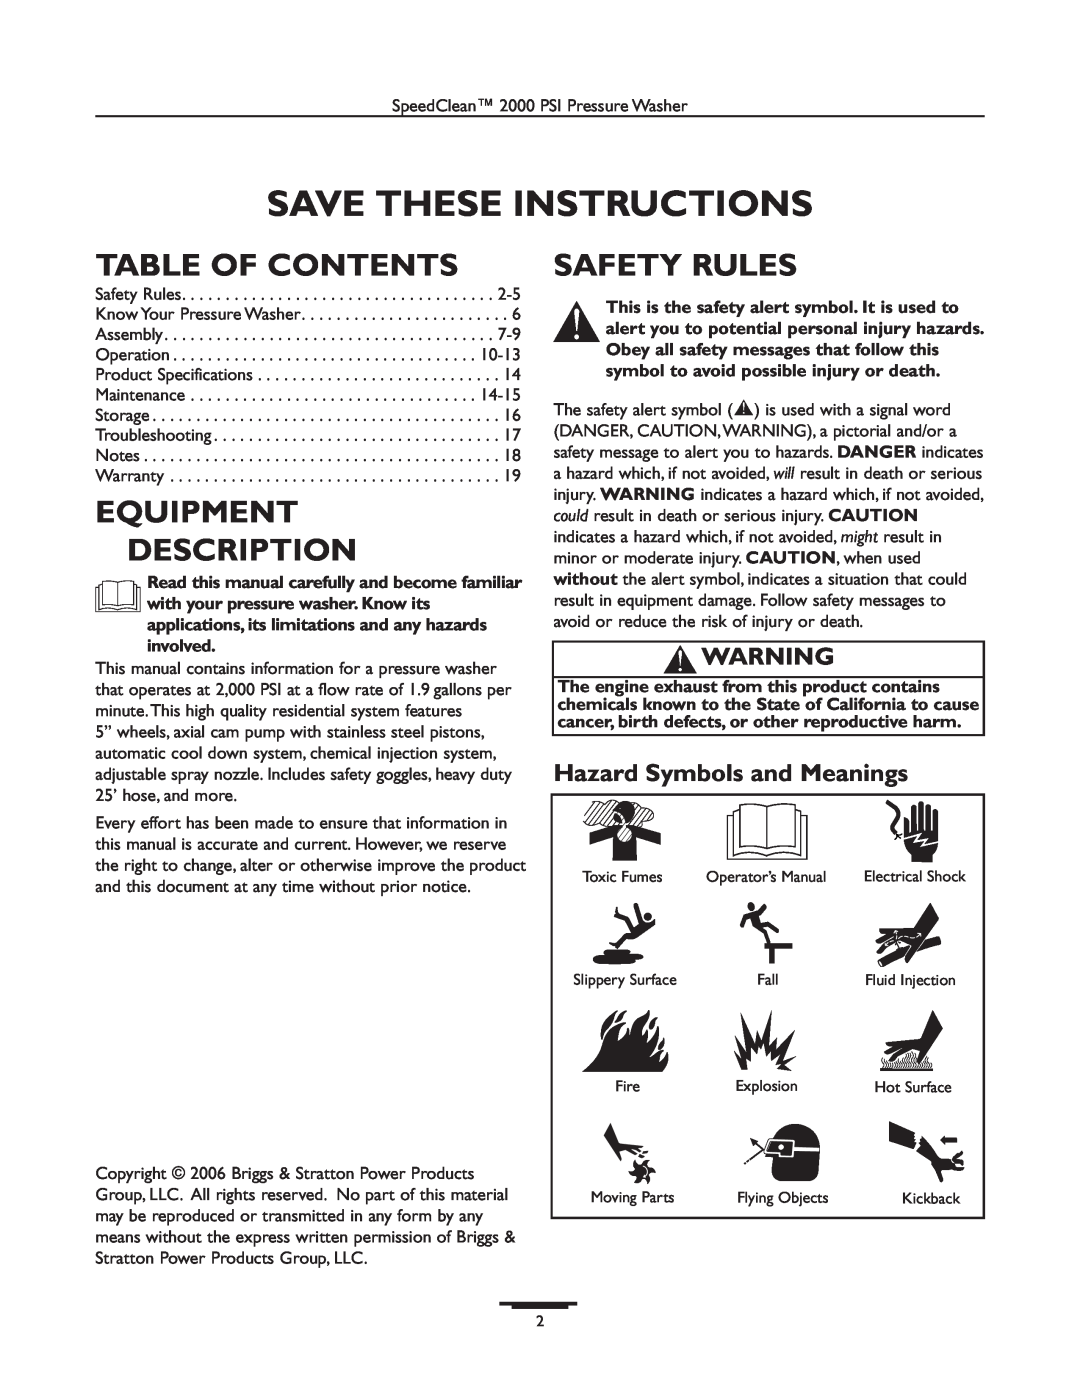 Briggs & Stratton 020238-0 Table Of Contents, Equipment Description, Safety Rules, Hazard Symbols and Meanings 